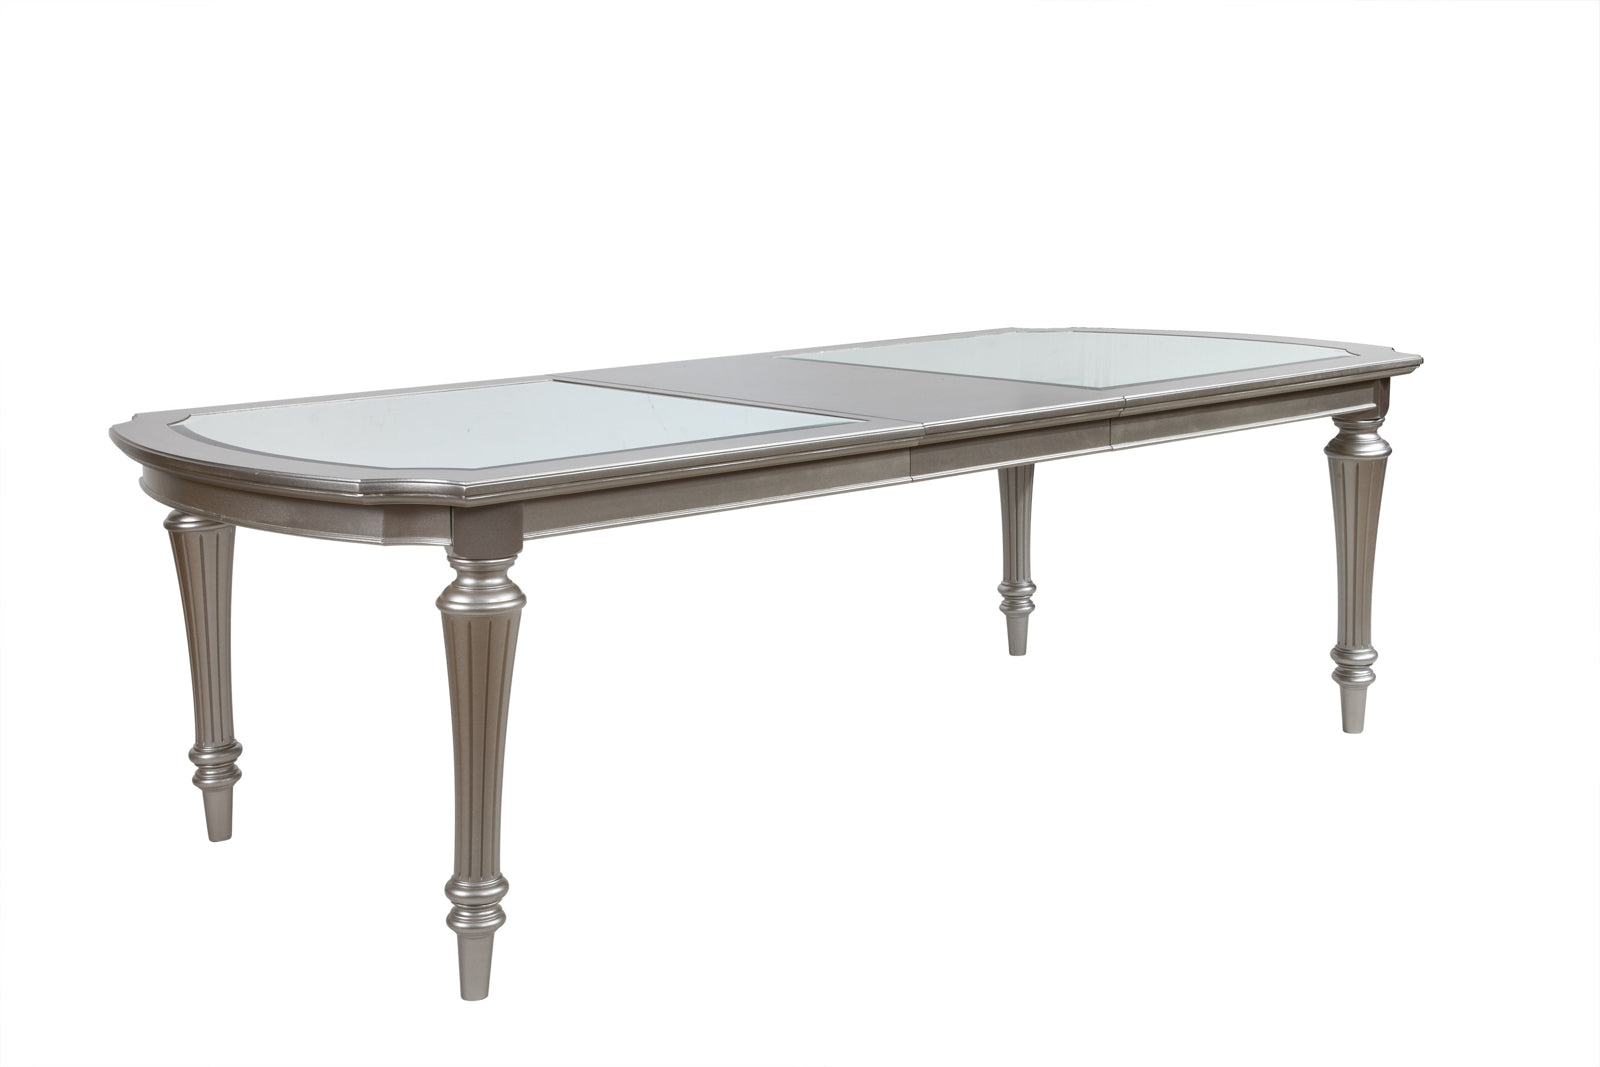 Platinum Extendable and Rectangular Dining Table By: Alabama Beds